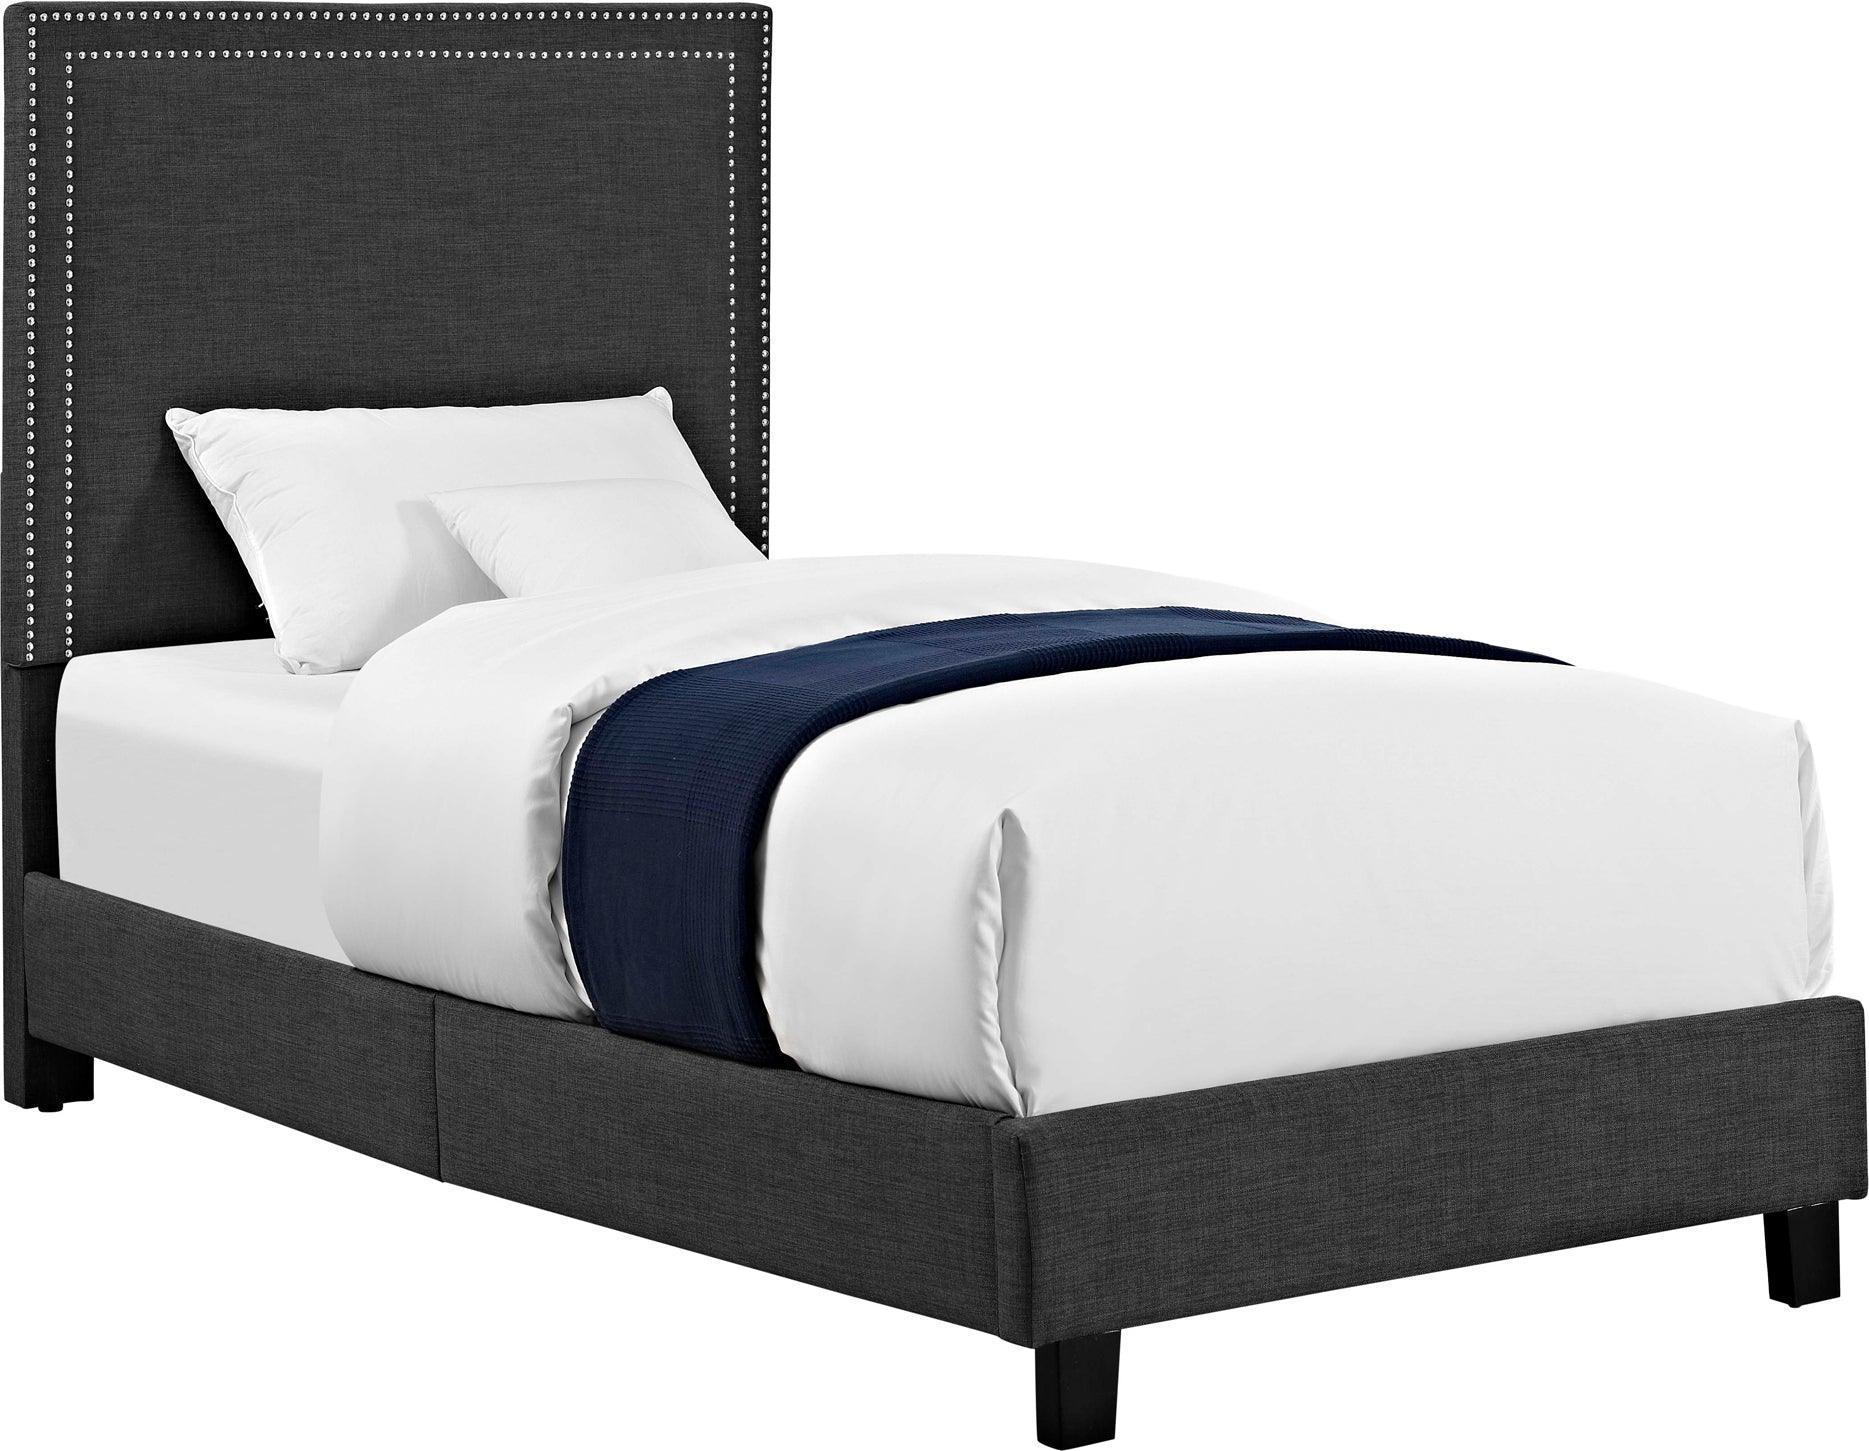 Elements Beds - Twin Platform Bed Charcoal